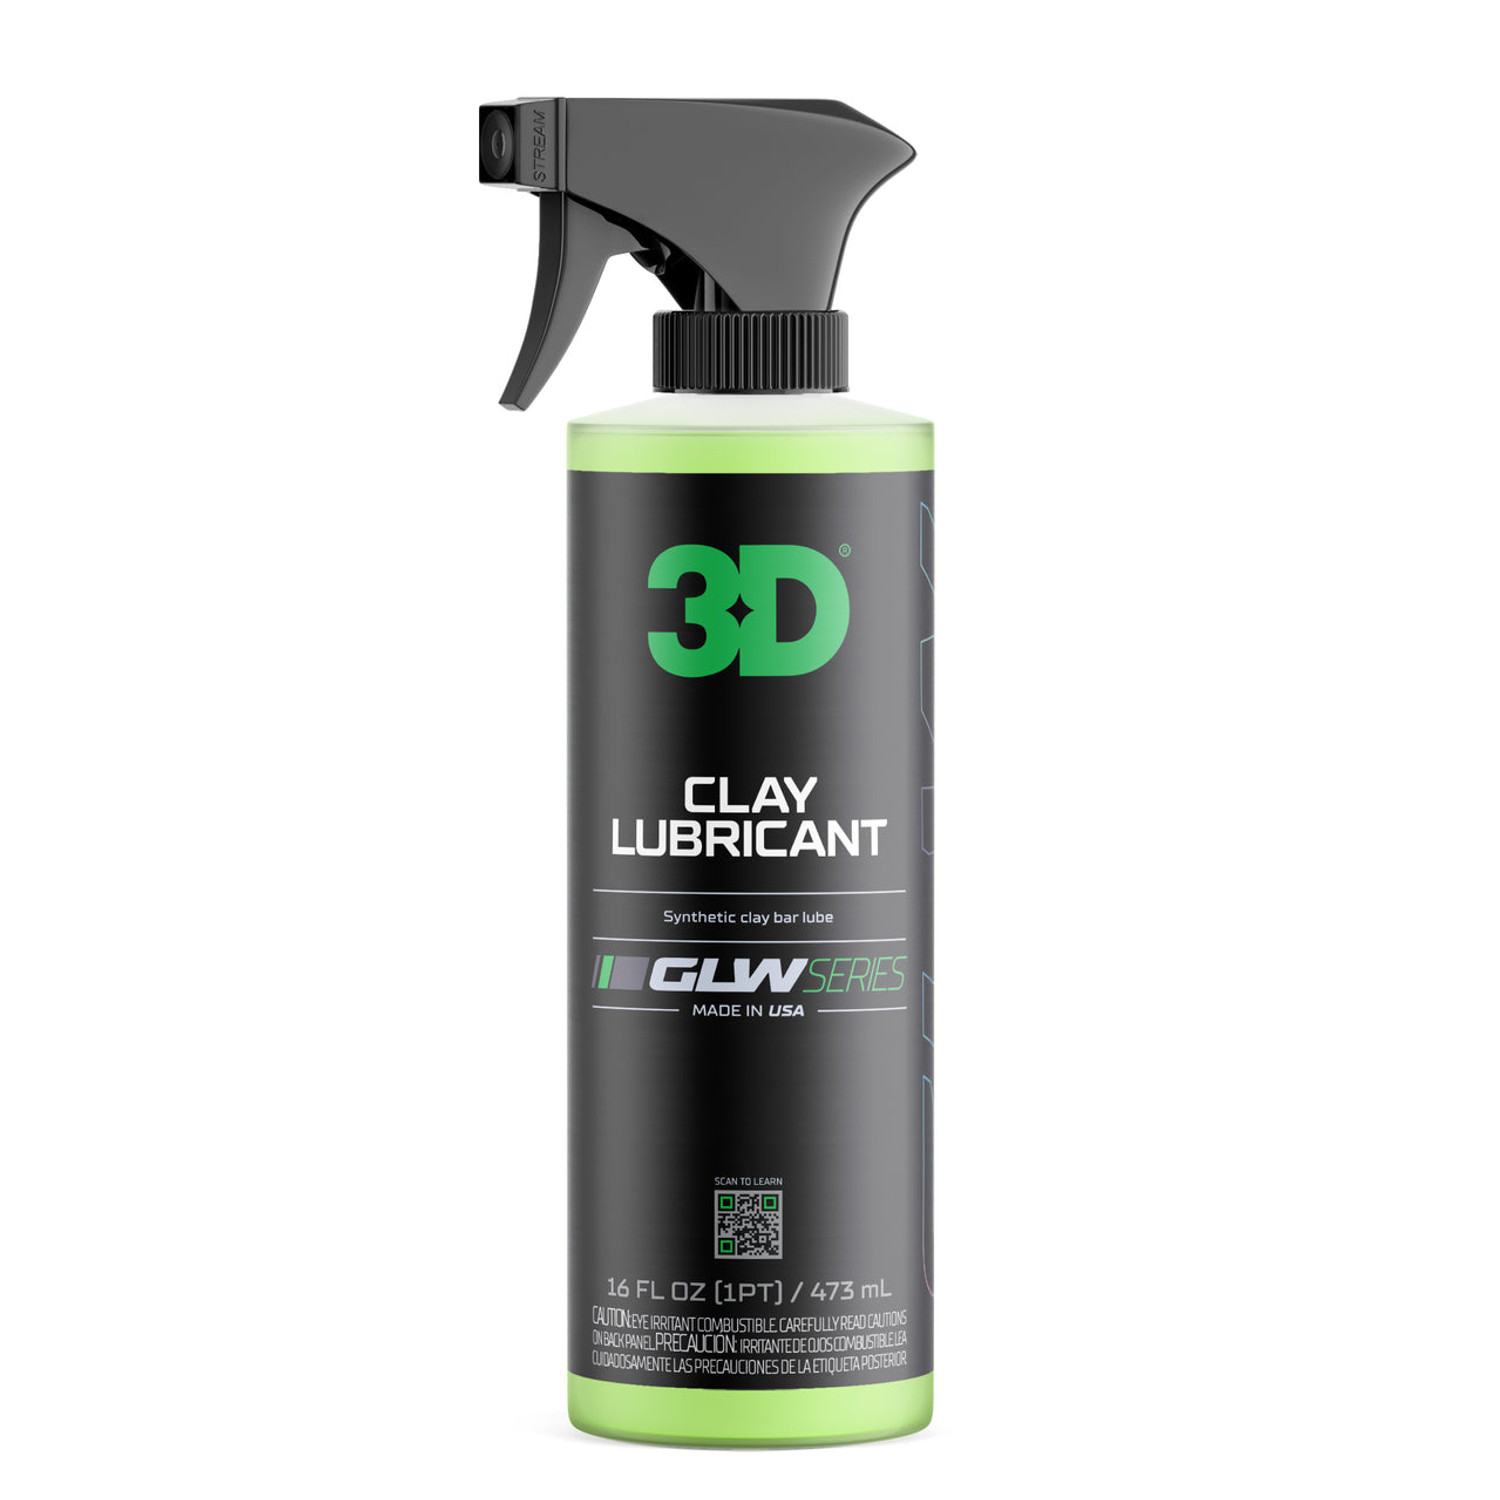 3D GLW Series Clay Lubricant 16oz | Synthetic Clay Bar Lube